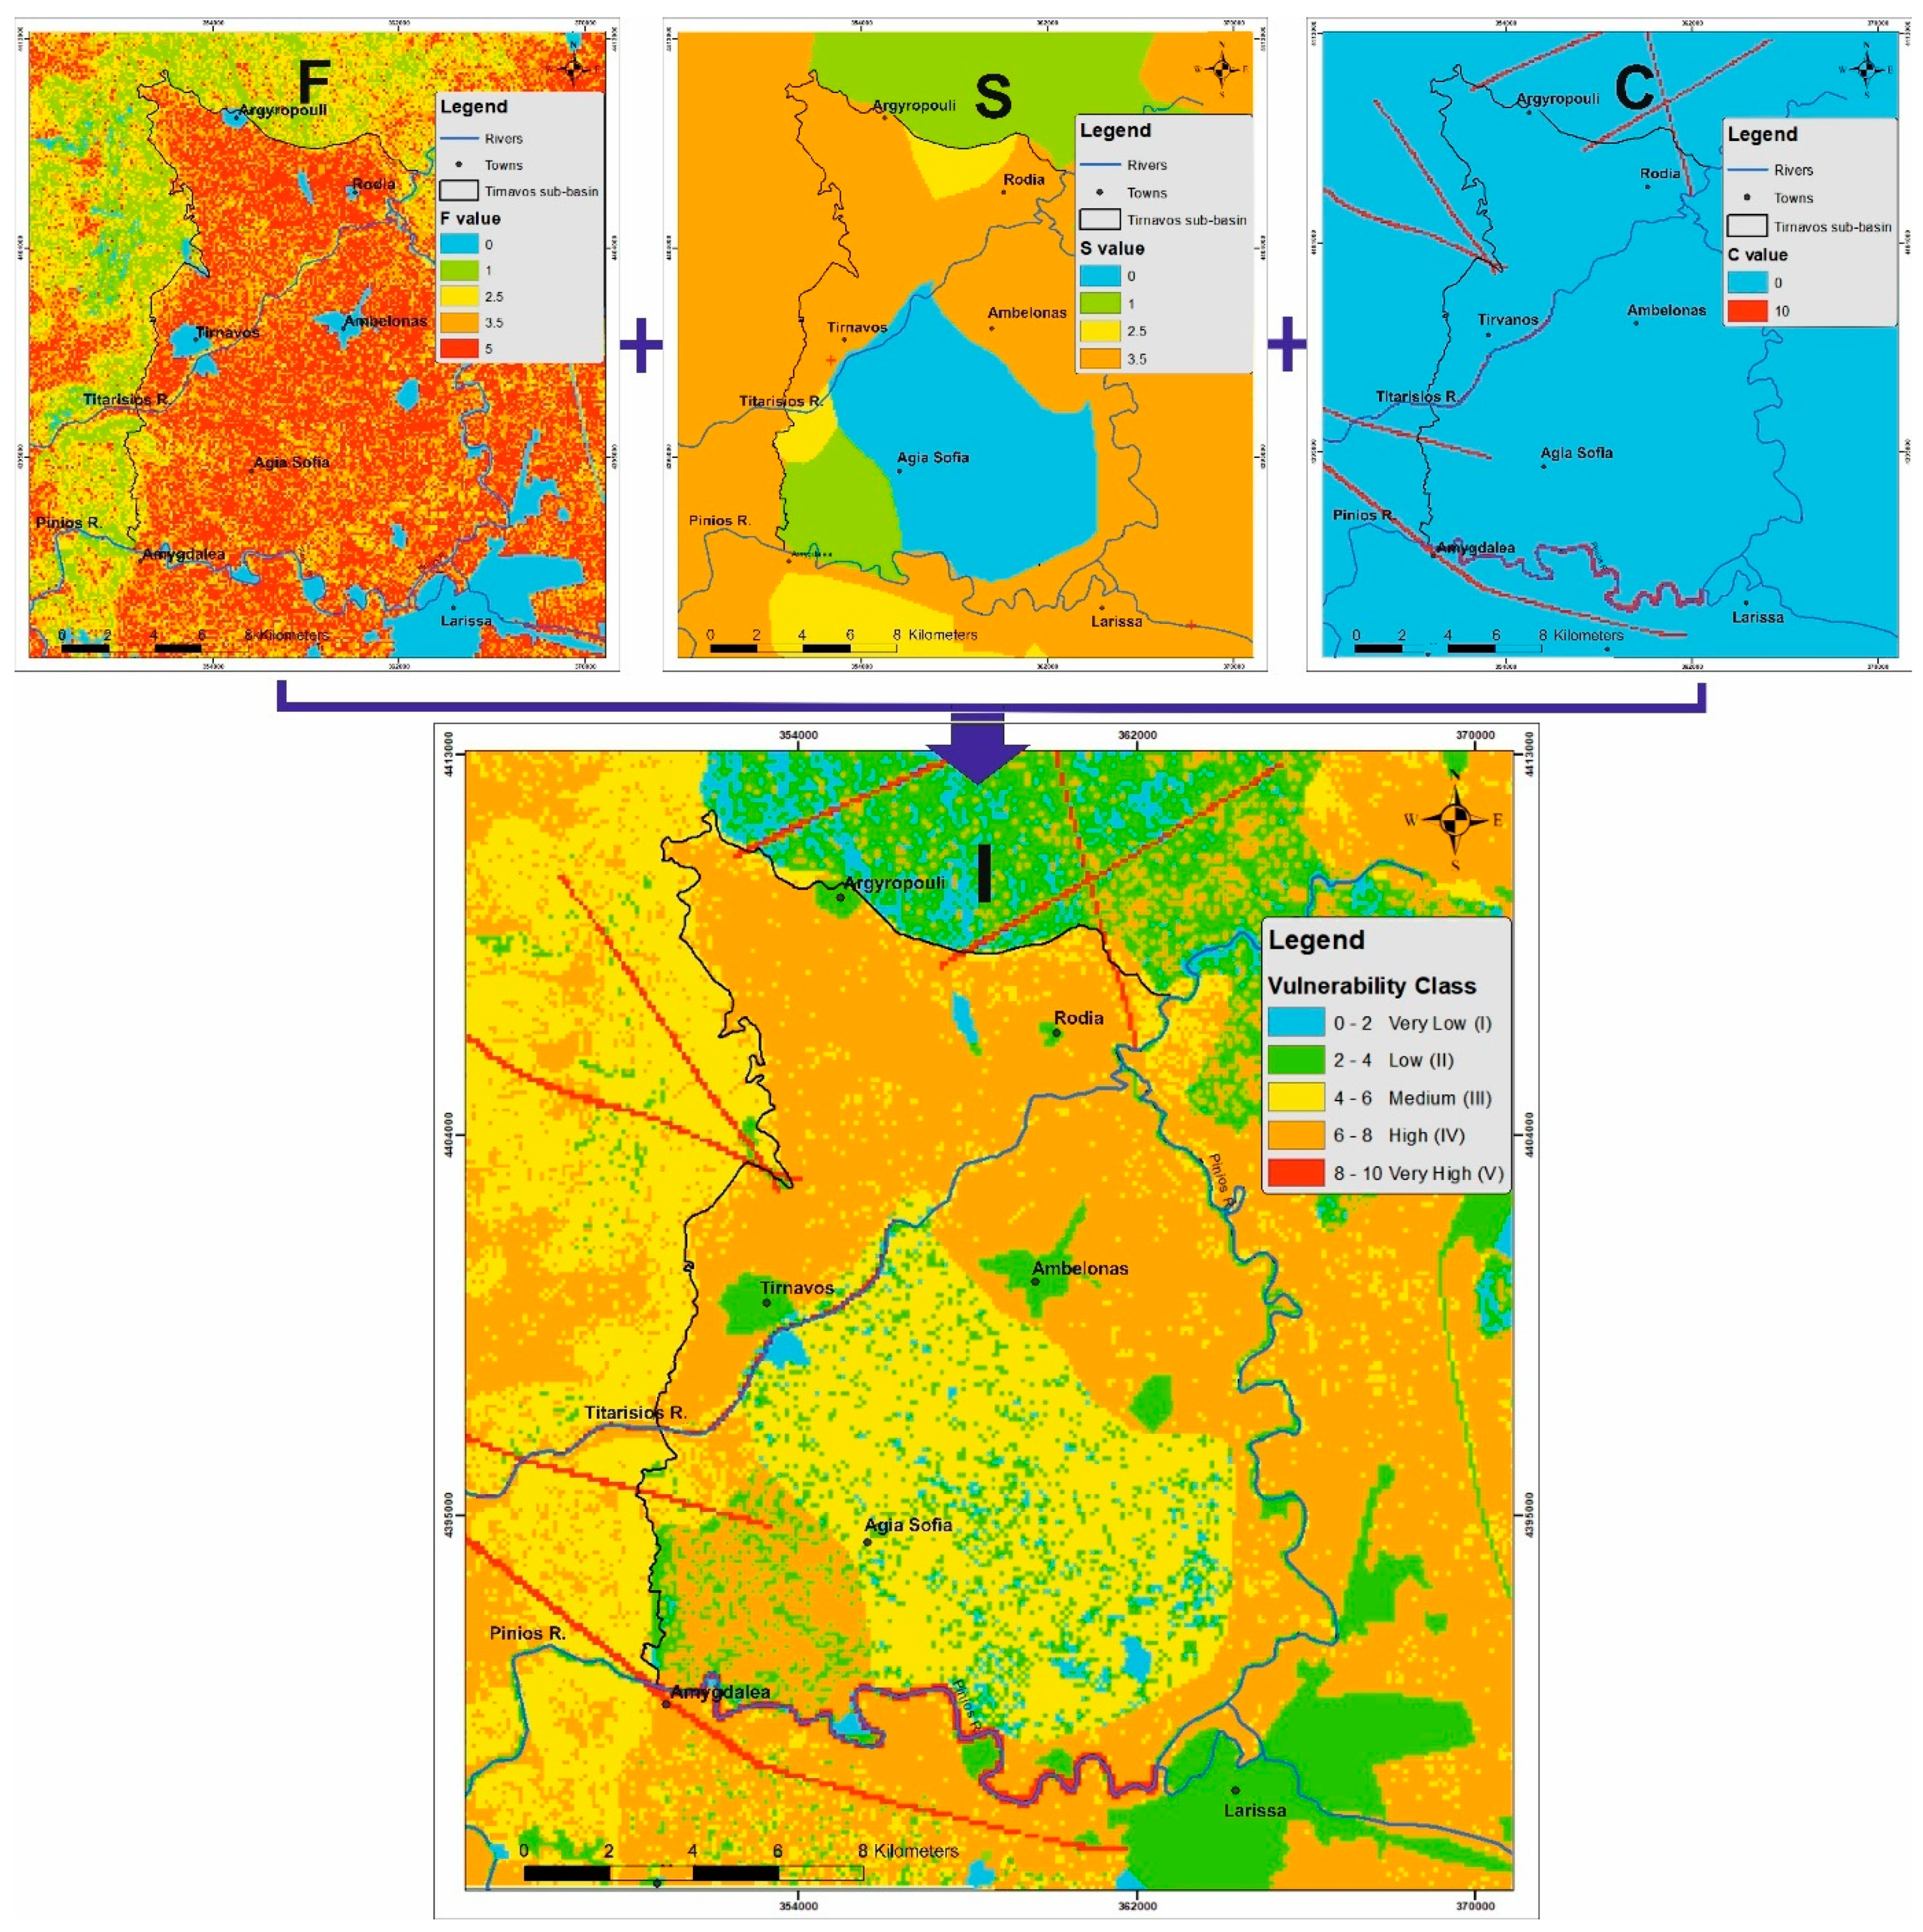 Water | Free Full-Text | Groundwater Vulnerability Analysis of Tirnavos  Basin, Central Greece: An Application of RIVA Method | HTML